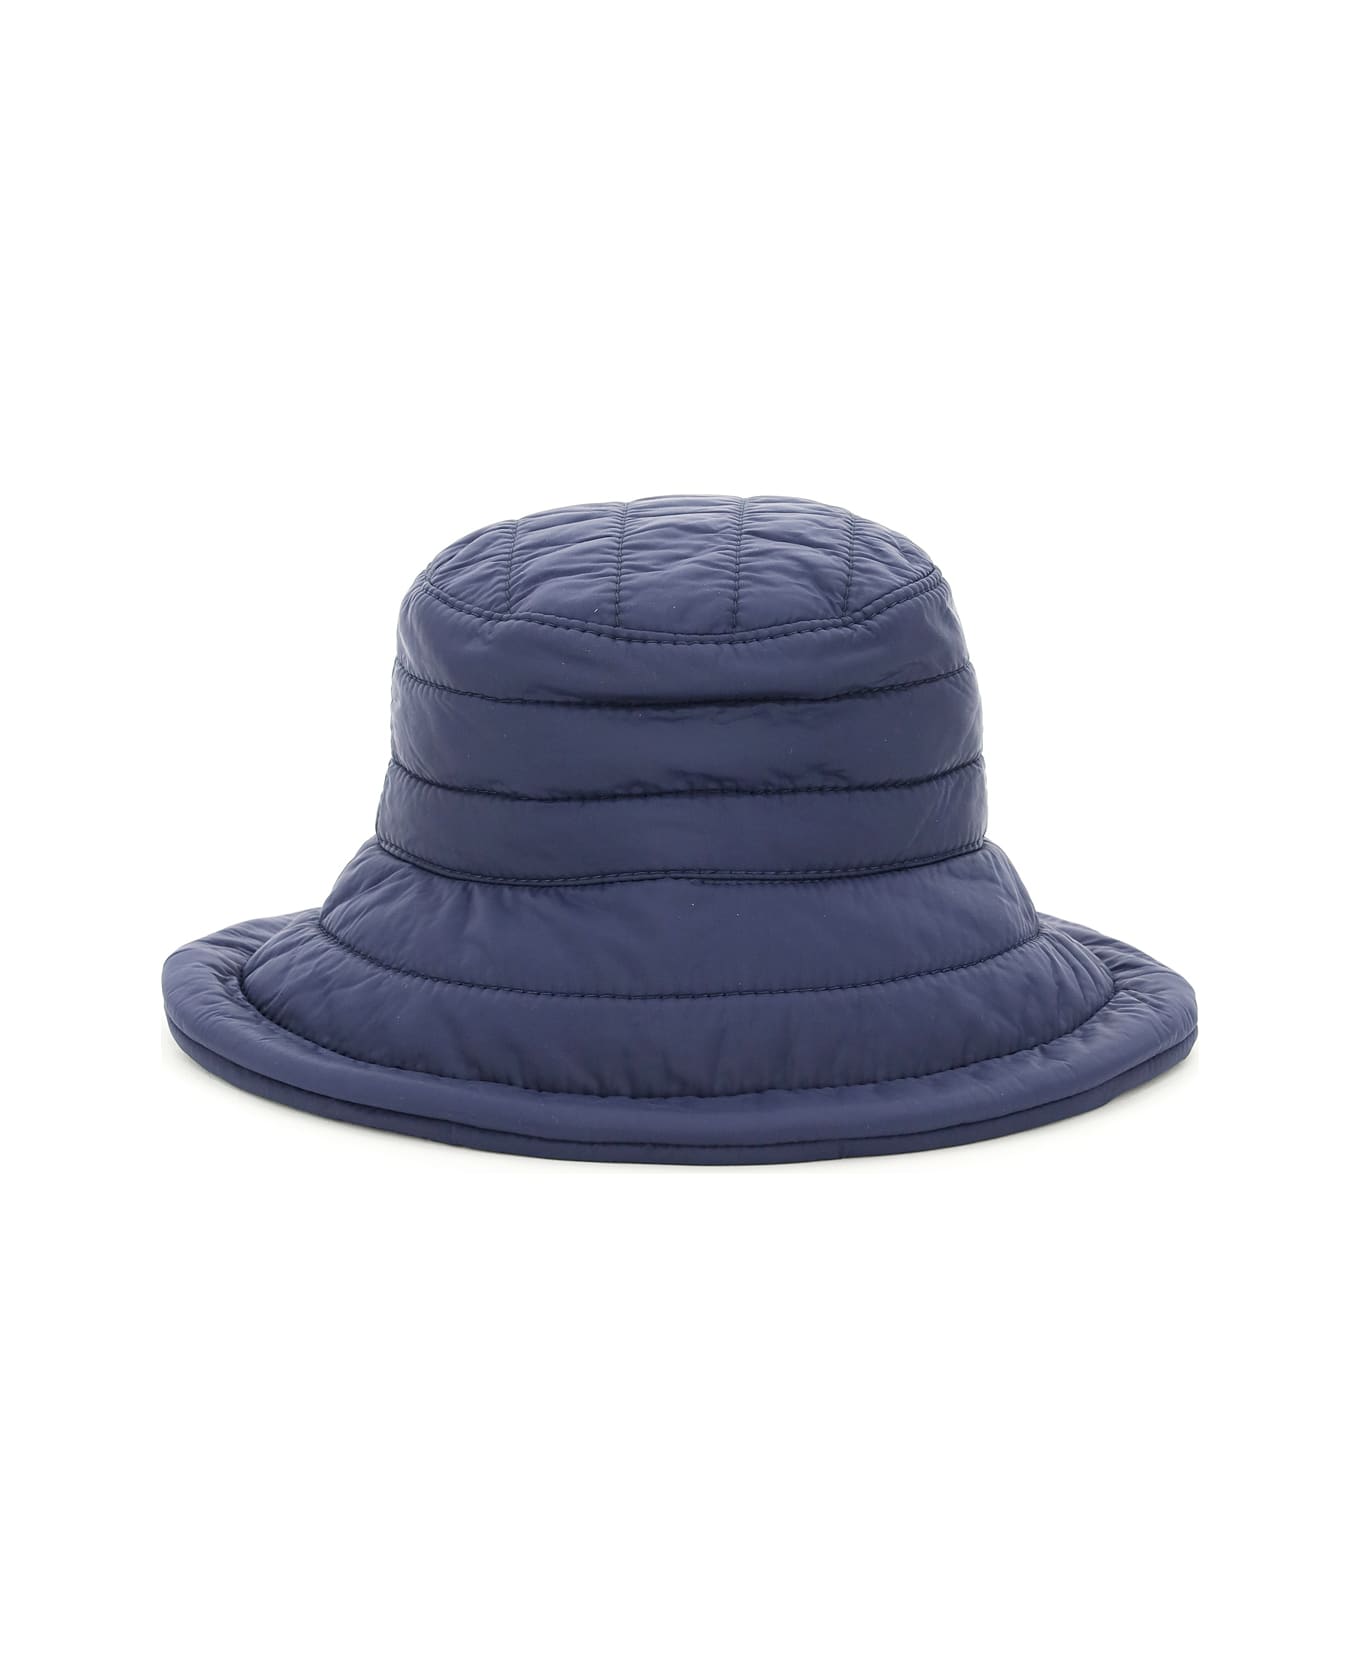 Maison Michel Quilted Charlotte Hat - NAVY (Blue)